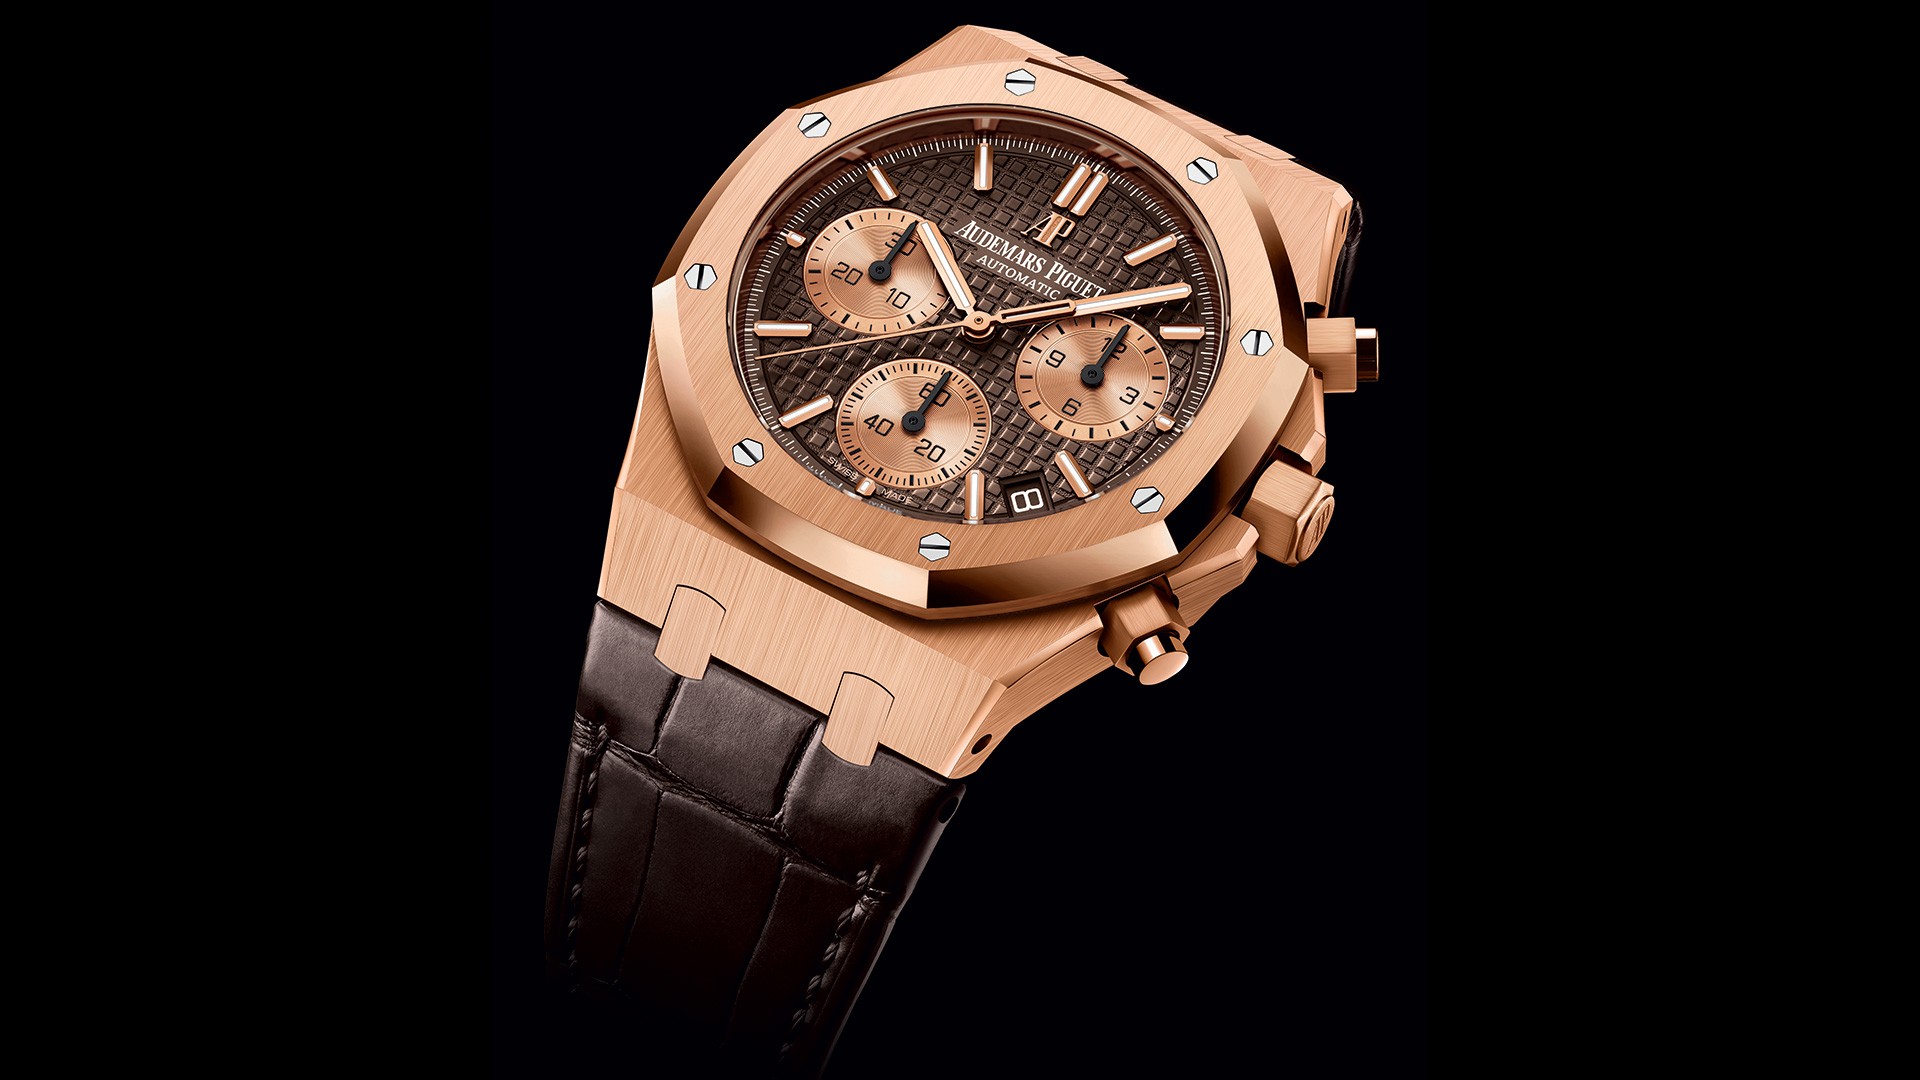 Audemars Piguet Royal Oak Offshore Camouflage Stainless Steel Blue Dial Watch 26400SO. OO. A335CA.01